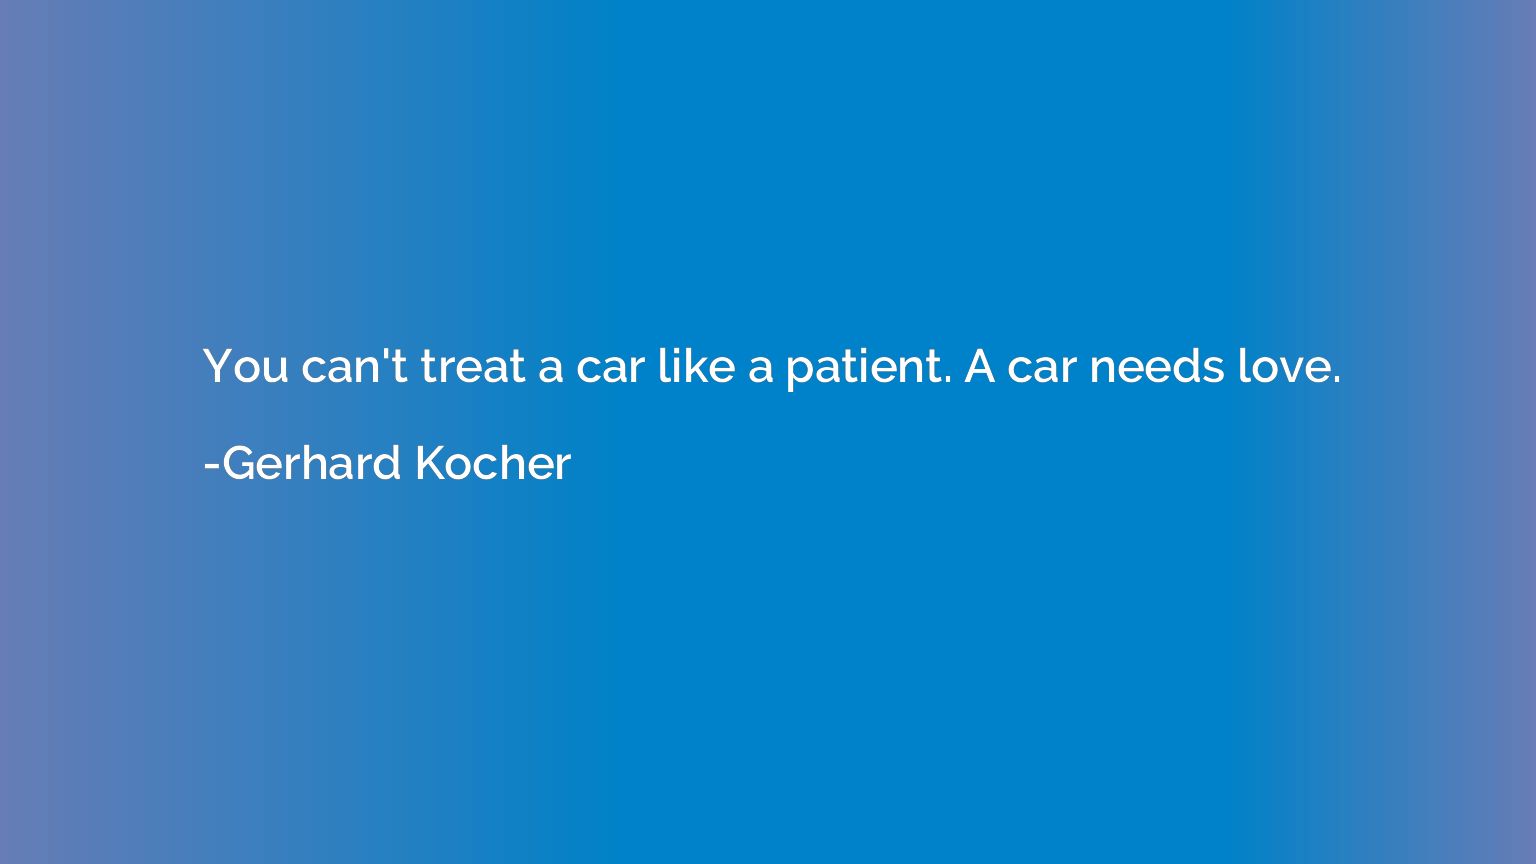 You can't treat a car like a patient. A car needs love.